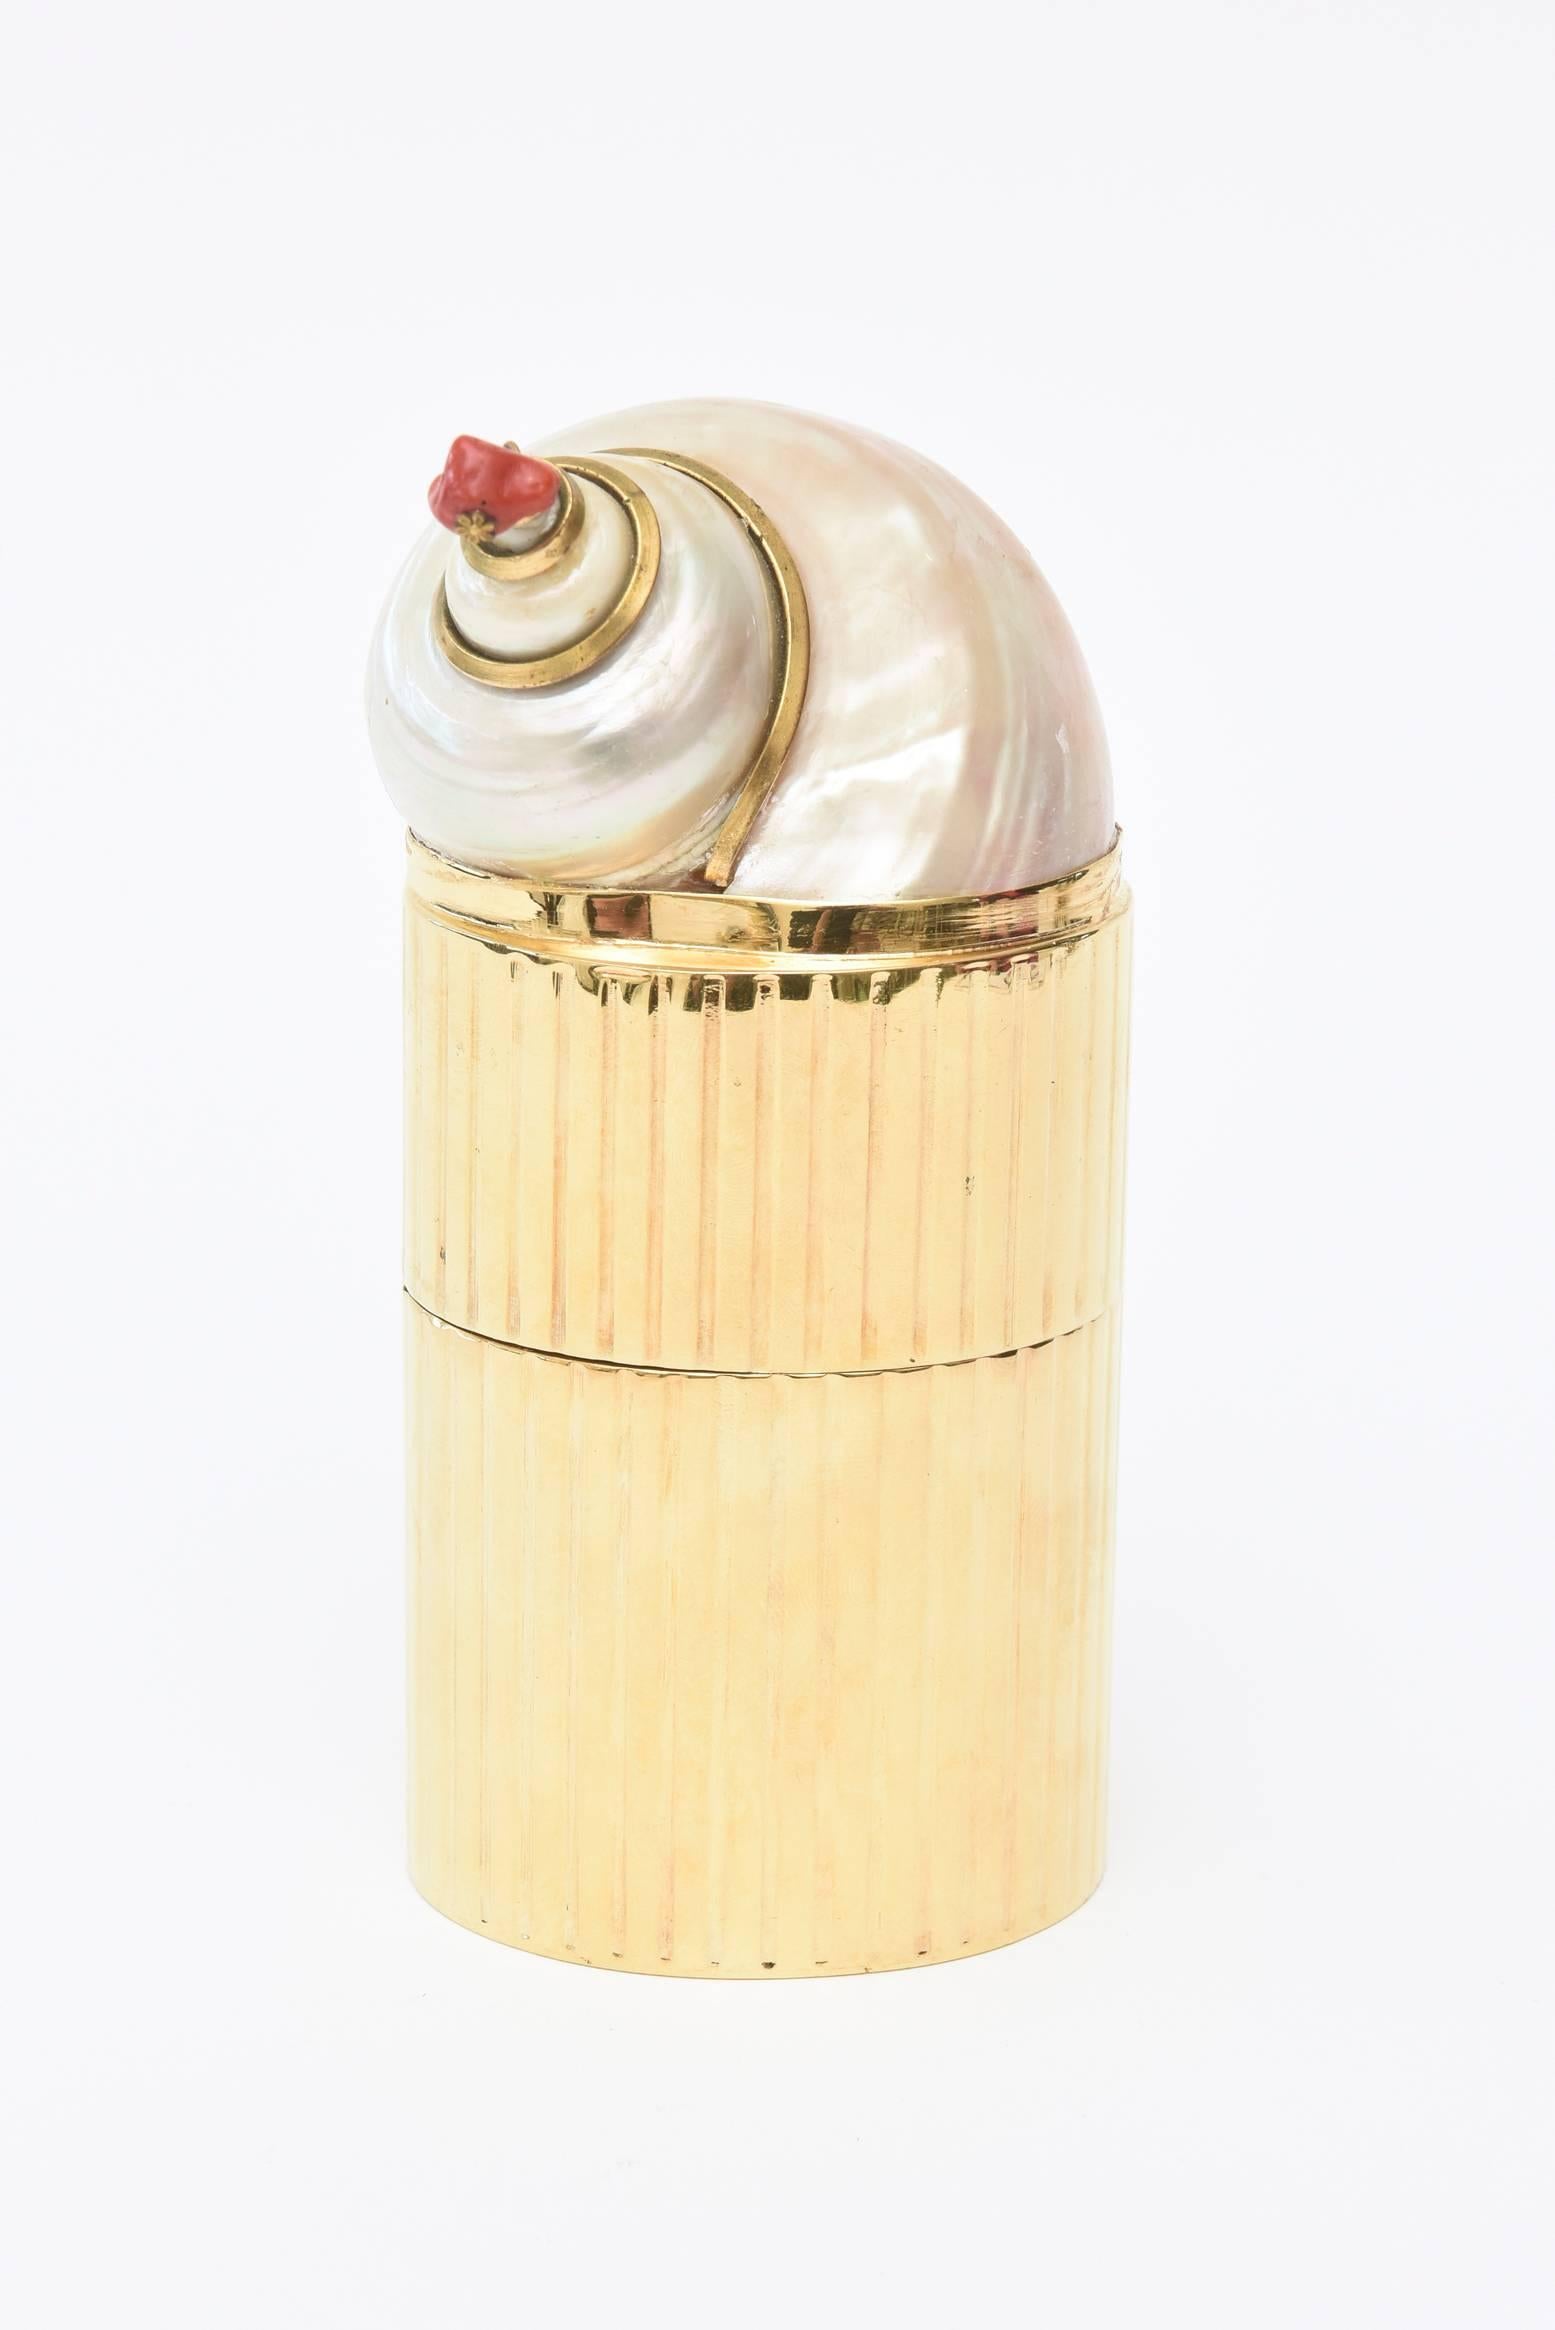 This stunning two-part real gold plated vintage box has a beautiful chamber swirled nautilus shell with surround gold band. The tip has a real piece of dangle coral attached. It is organic modern.
It is from the 1970s and was originally sold at